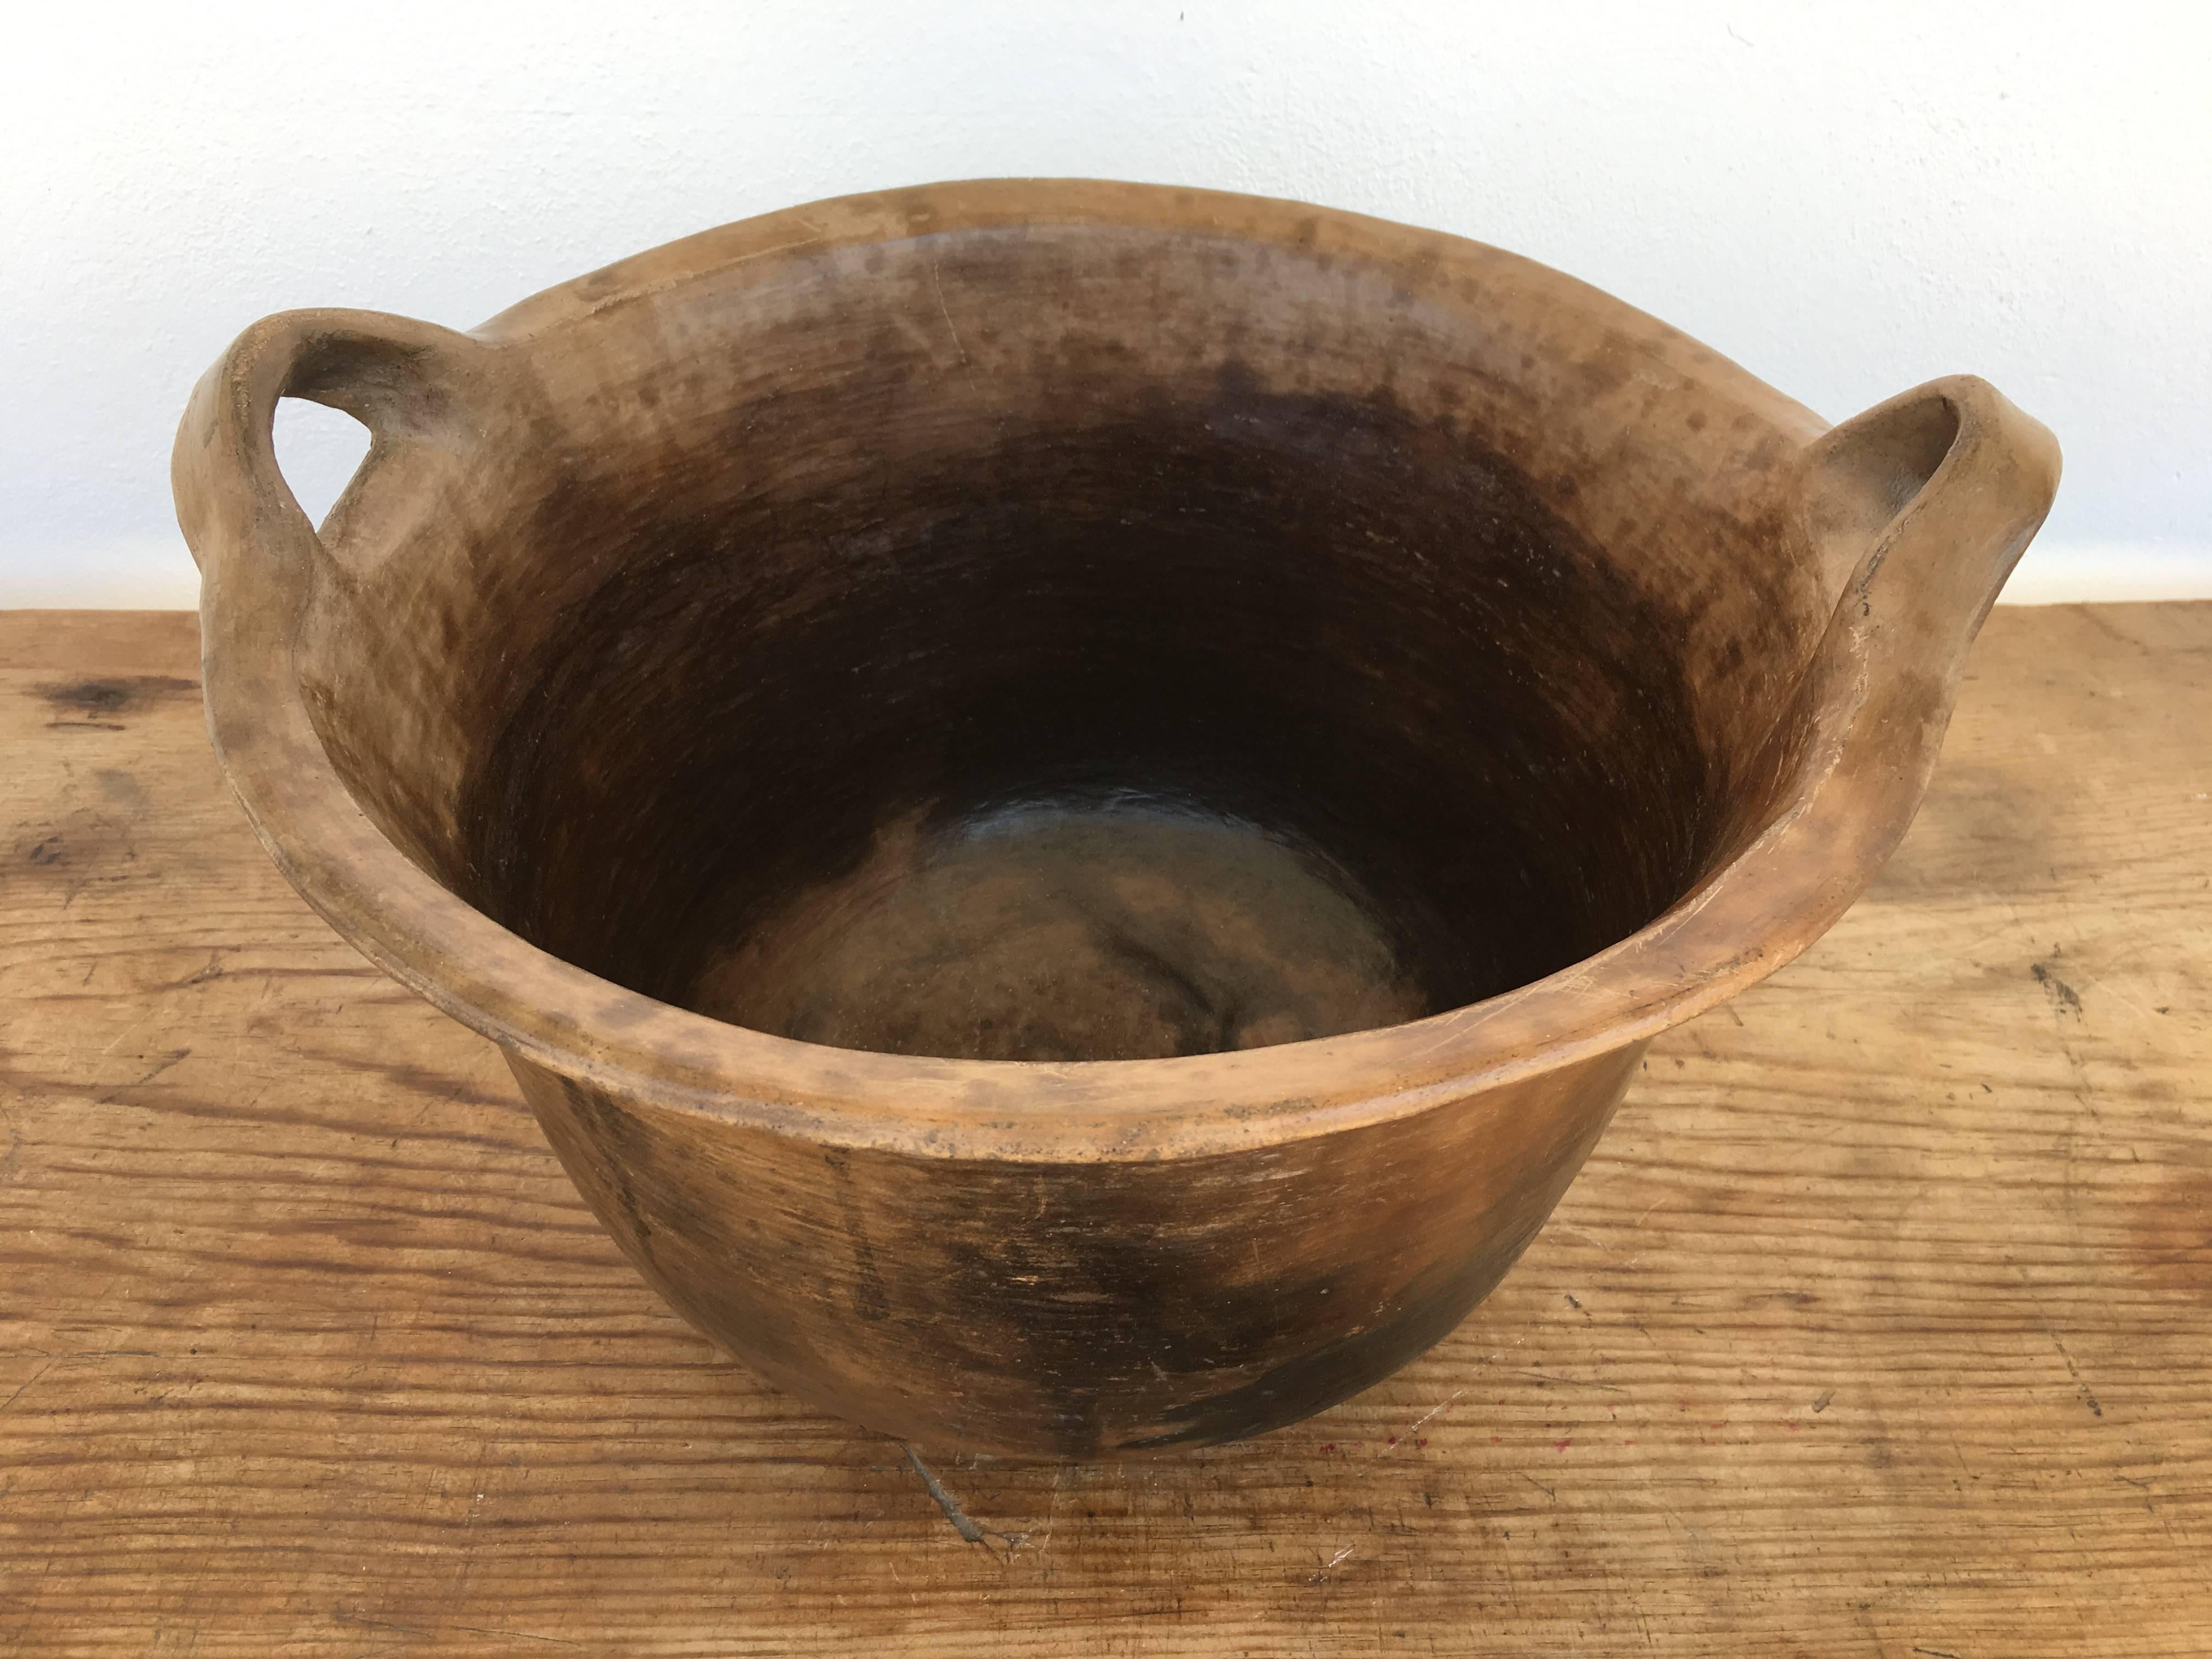 Burnished Ceramic Bowl Used for Candle-Making from Mexico